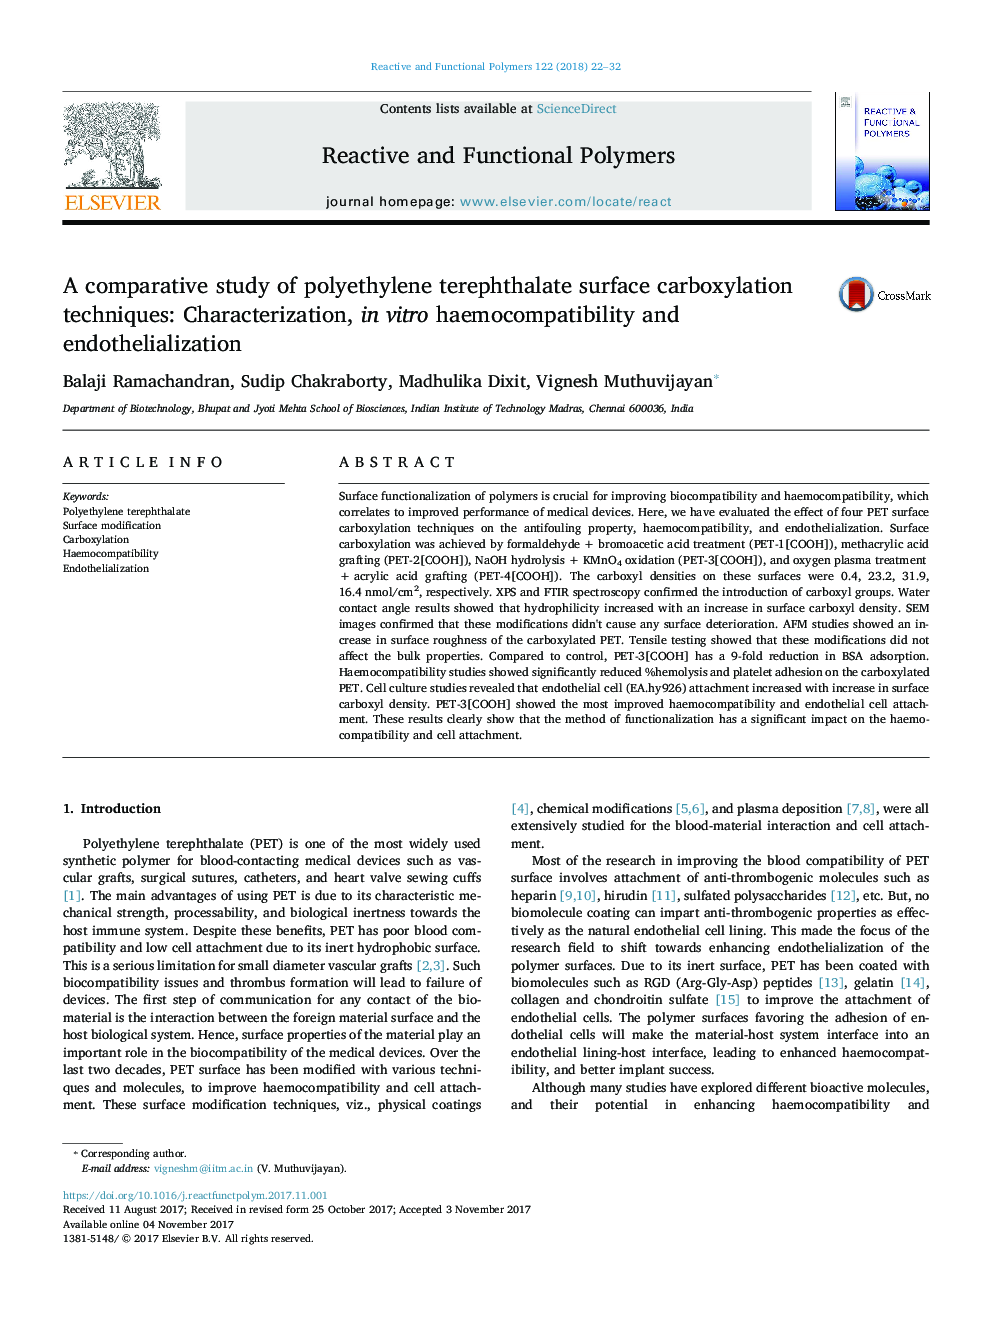 A comparative study of polyethylene terephthalate surface carboxylation techniques: Characterization, in vitro haemocompatibility and endothelialization